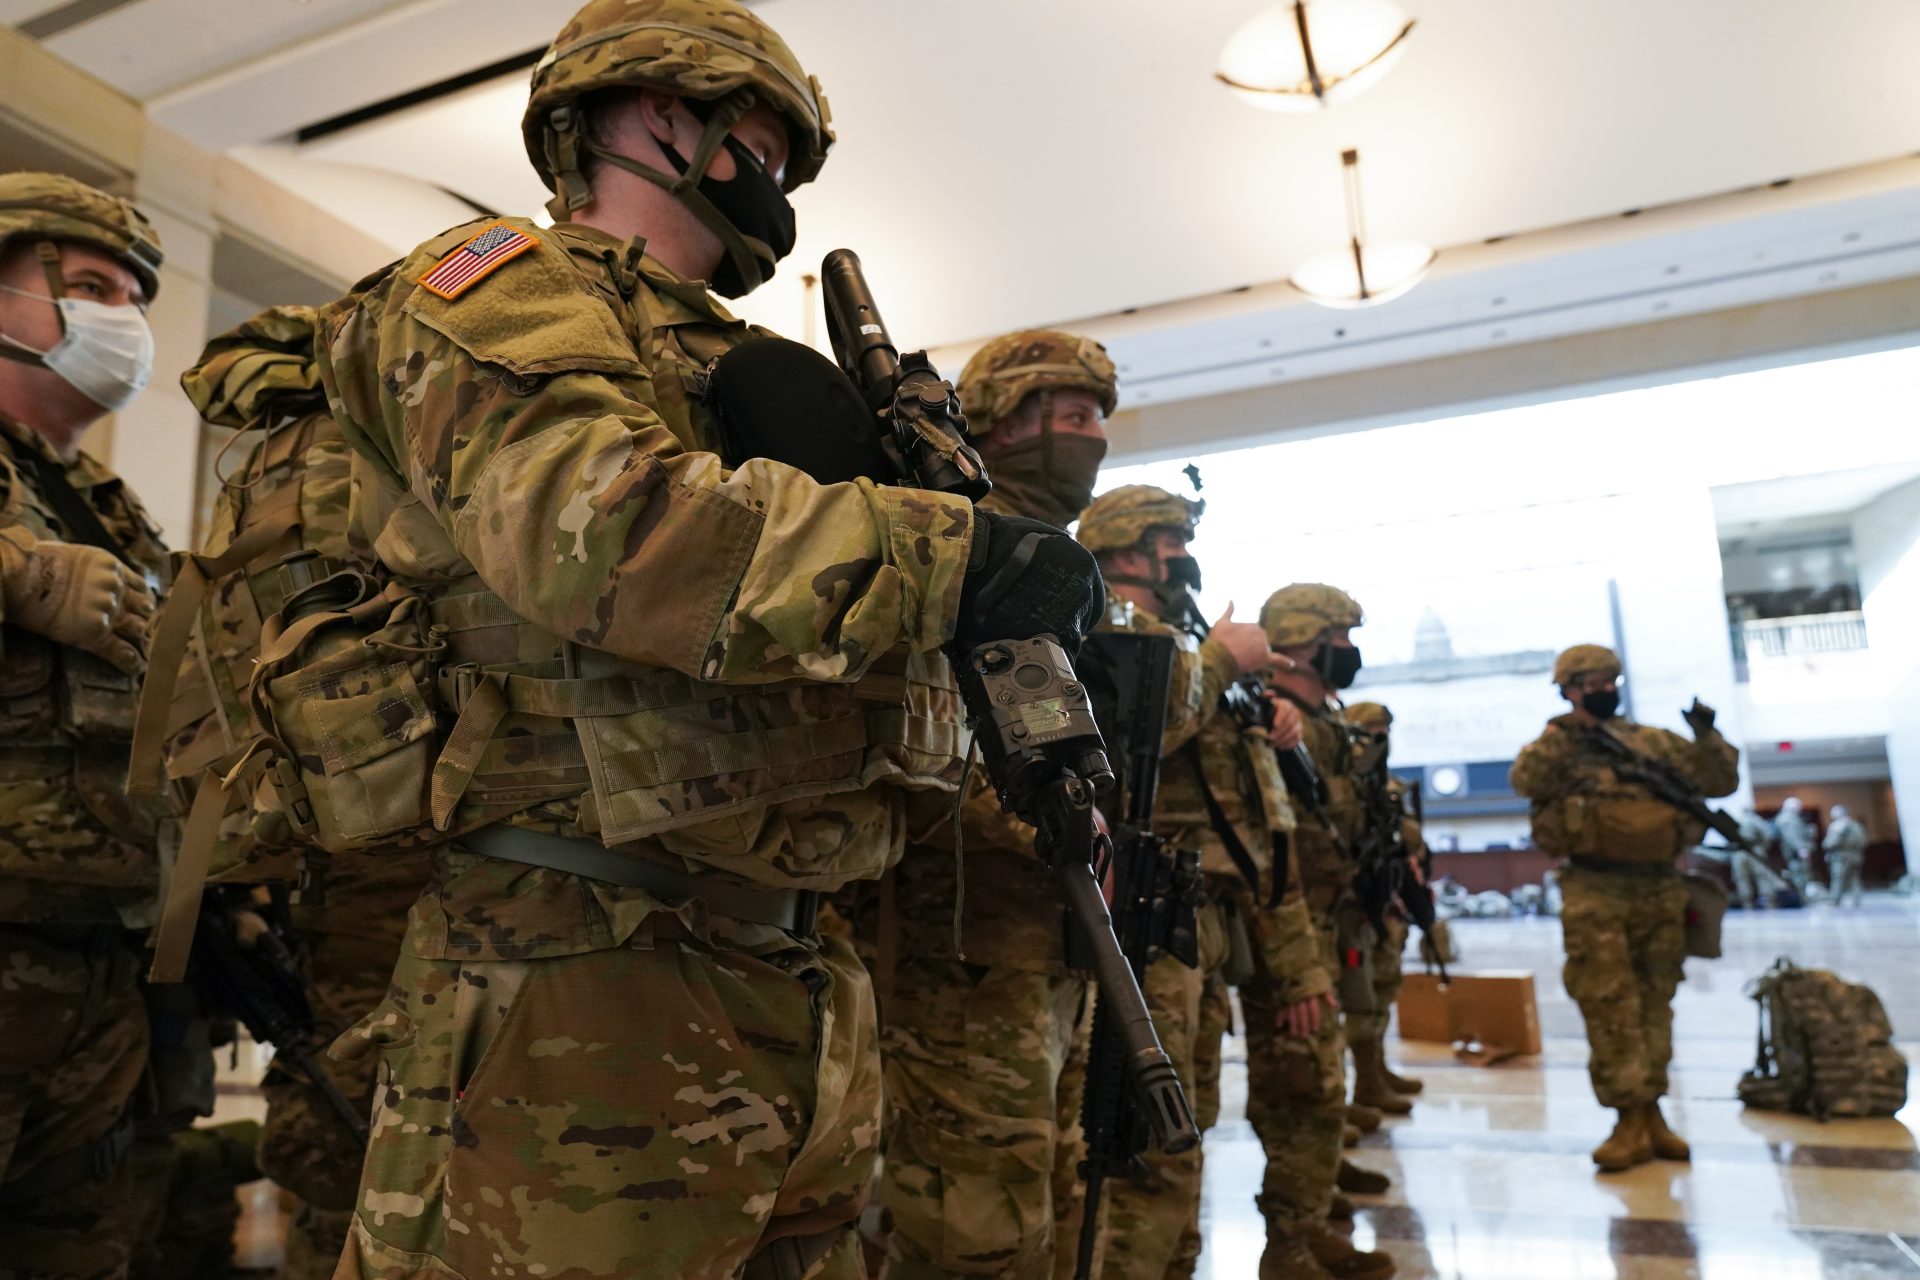 Troops stand in formation inside the Capitol Visitor's Center to reinforce security at the Capitol in Washington, Wednesday, Jan. 13, 2021. The House of Representatives is pursuing an article of impeachment against President Donald Trump for his role in inciting an angry mob to storm the Capitol last week.